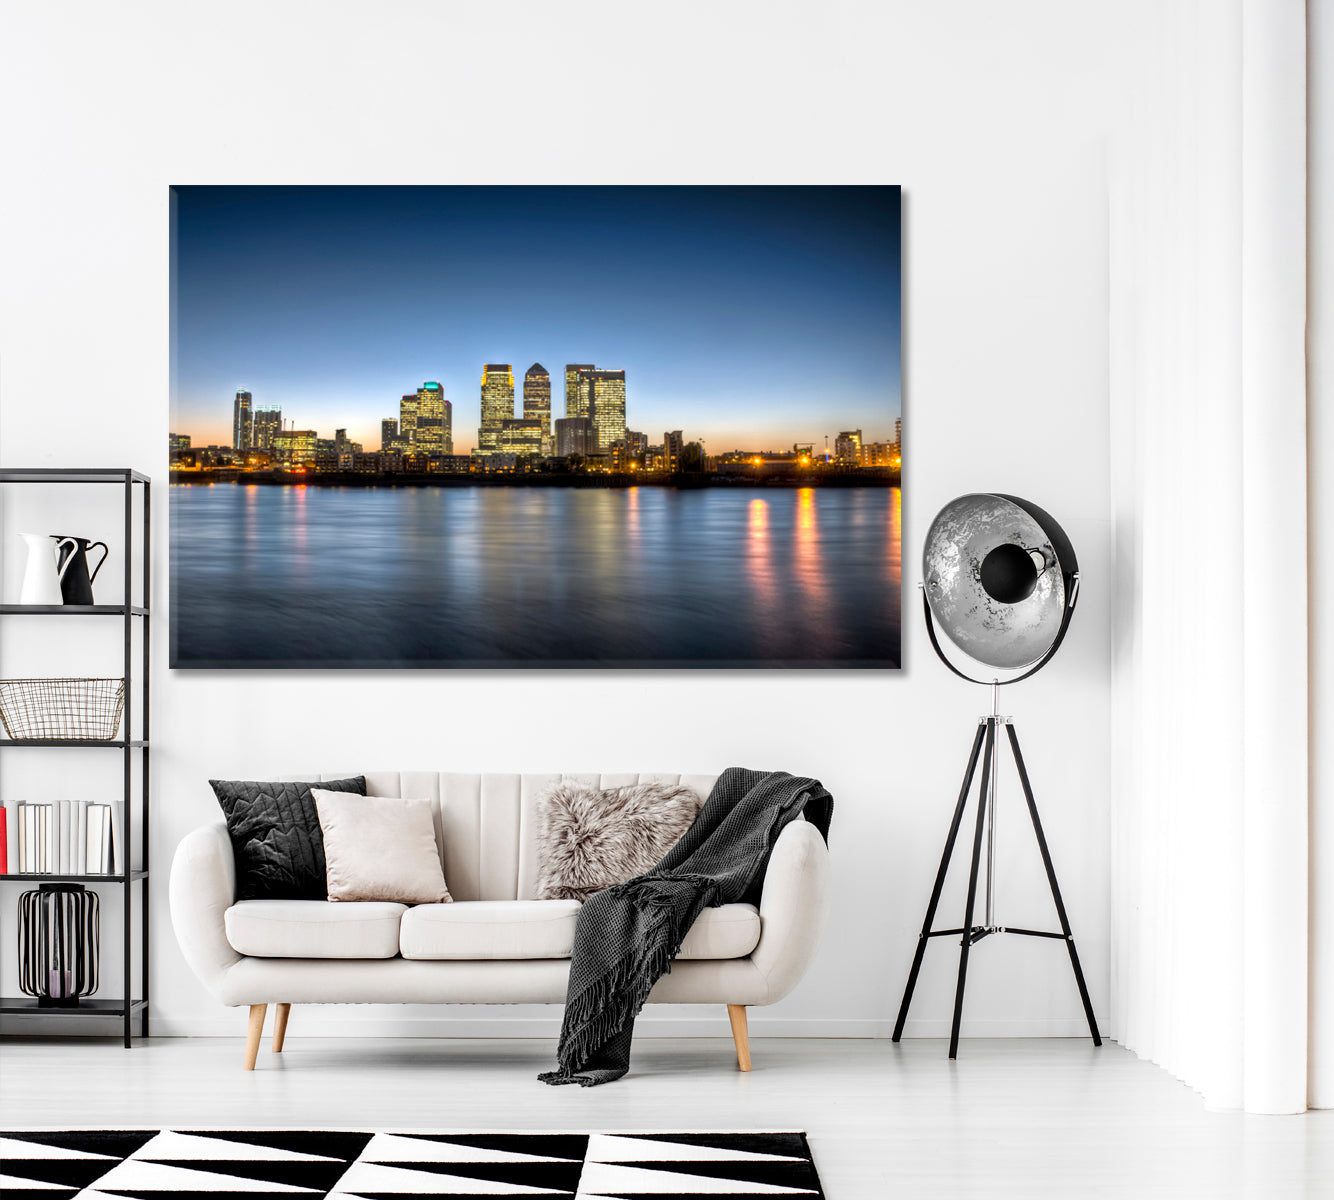 Canary Wharf Financial District London Canvas Print ArtLexy 1 Panel 24"x16" inches 